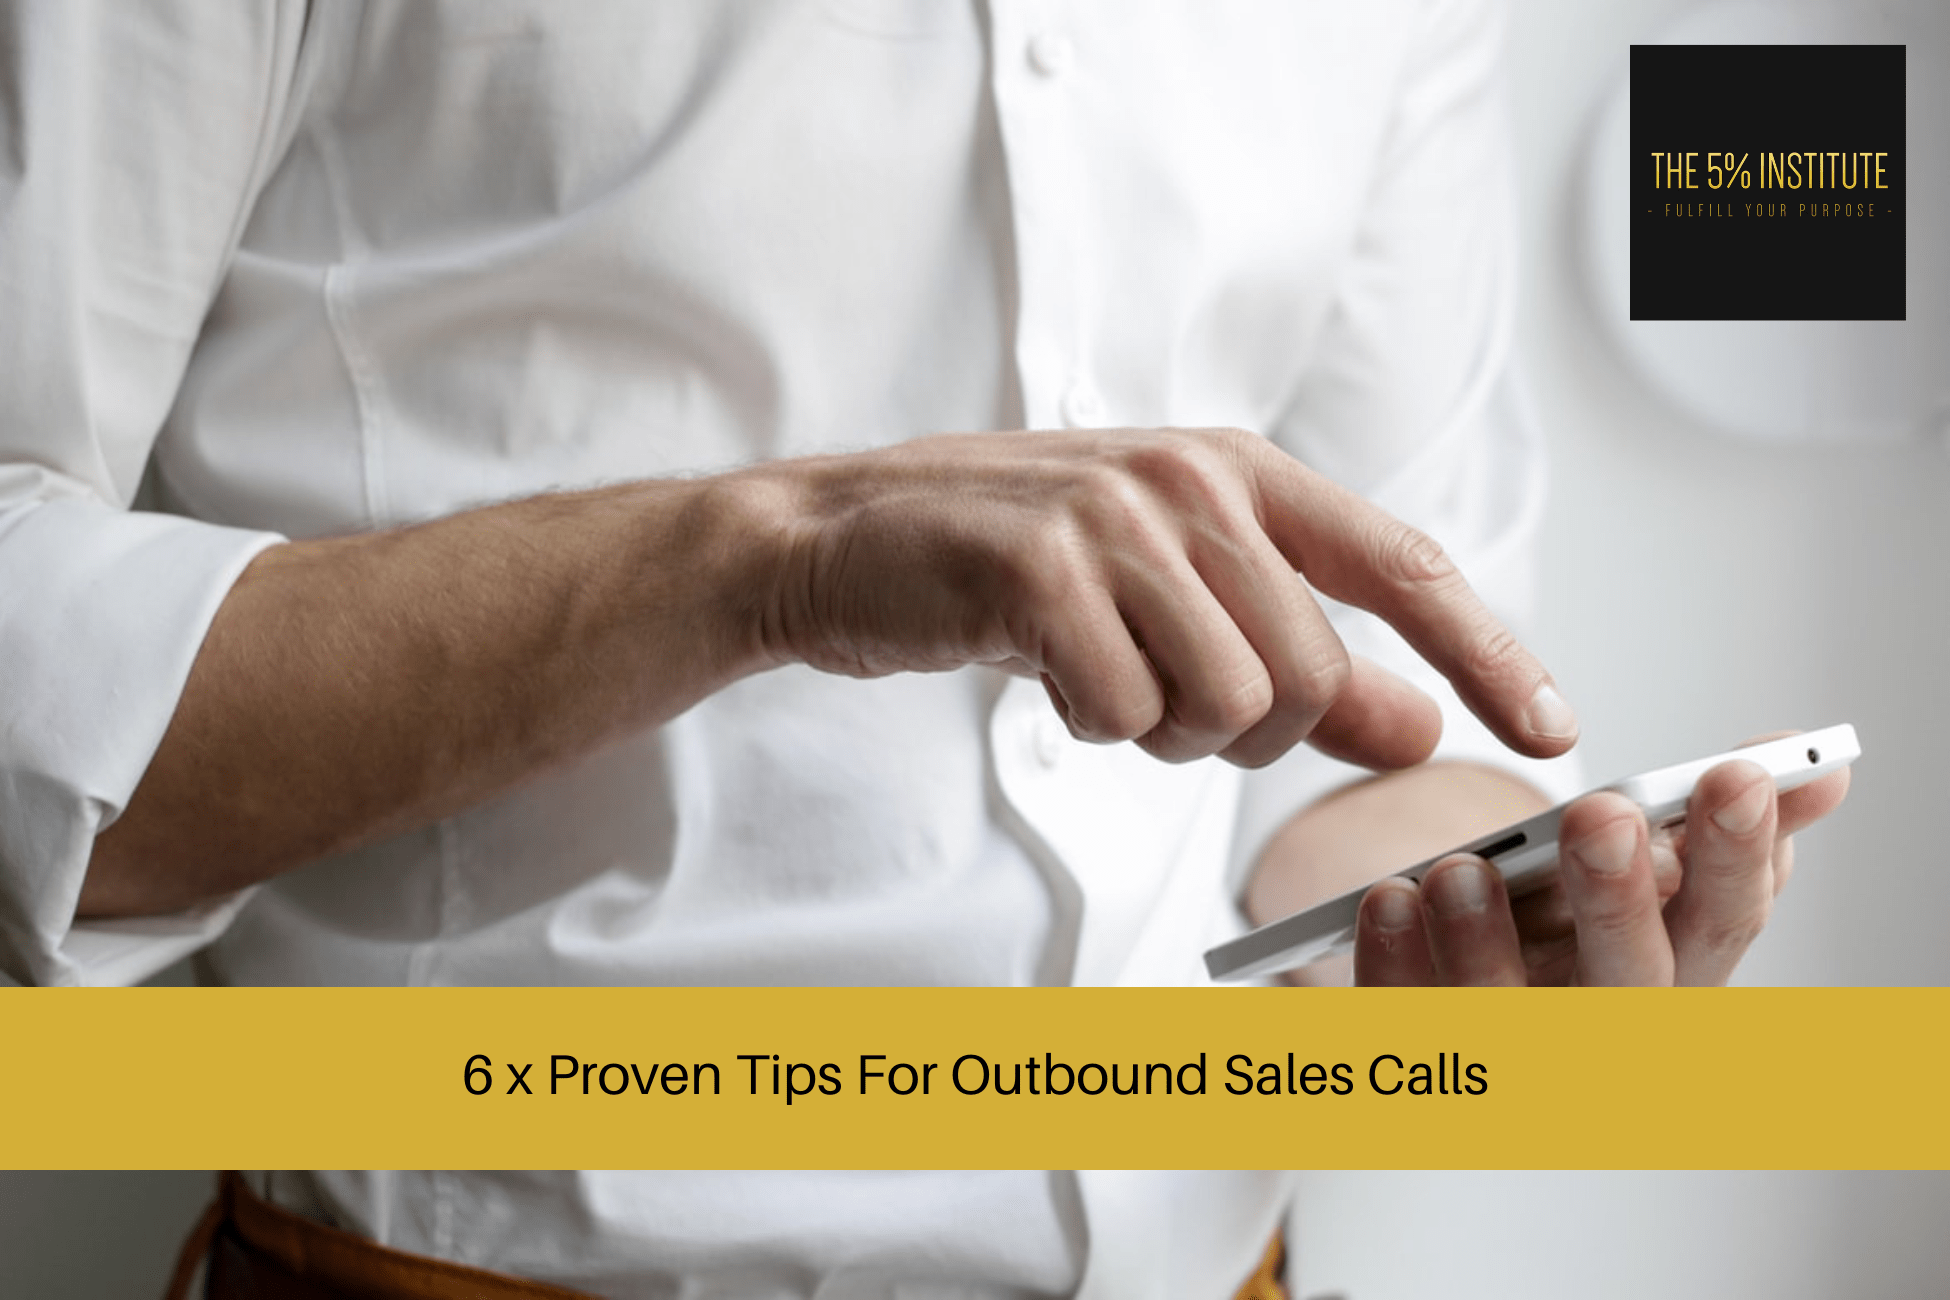 Tips For Outbound Sales Calls